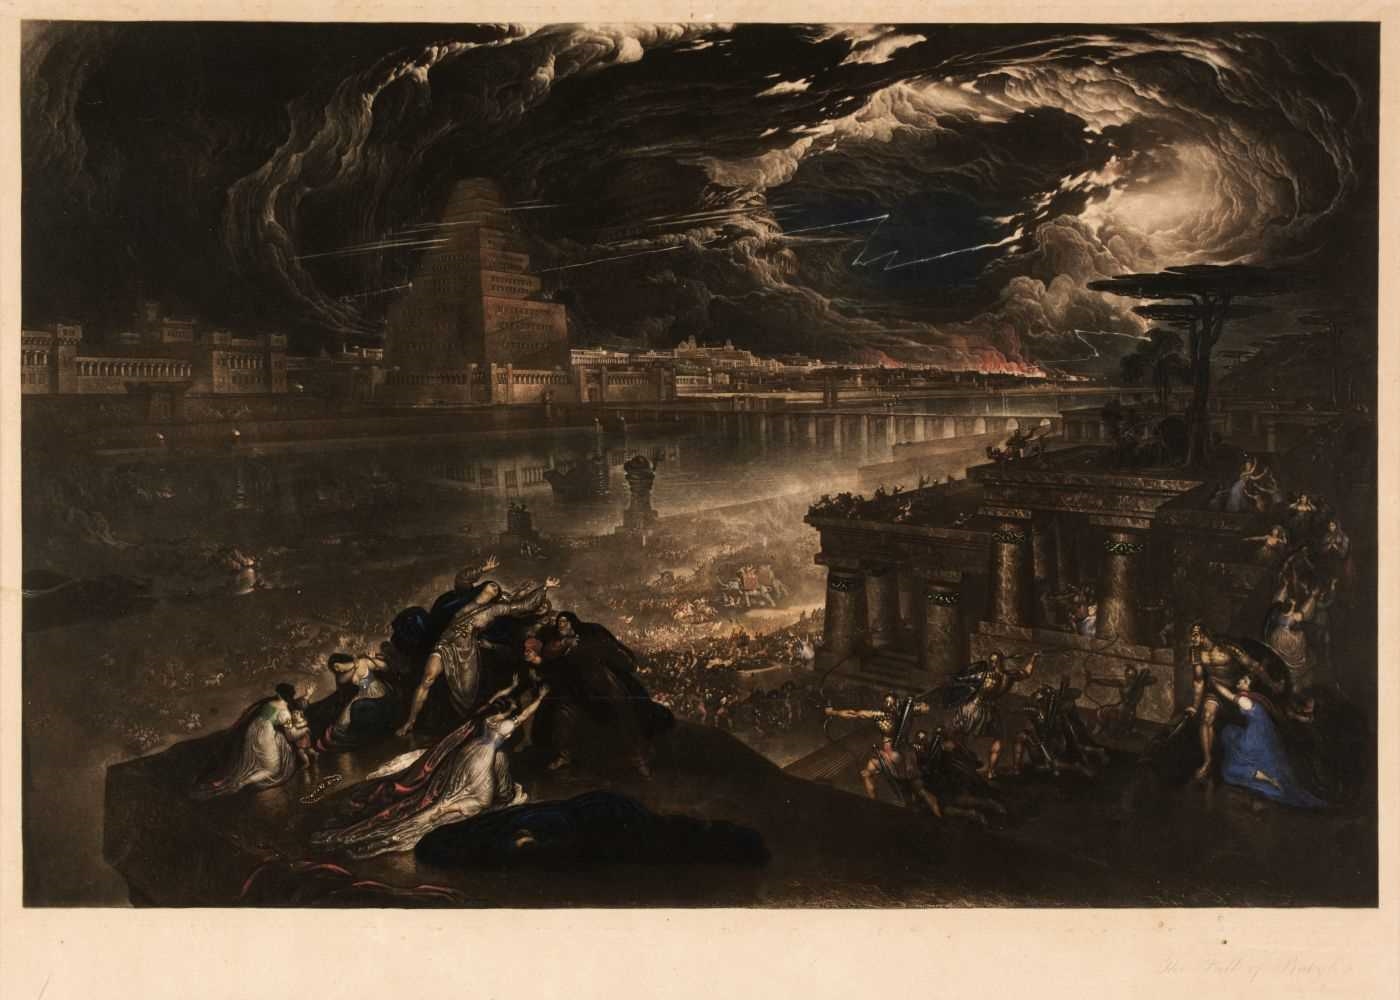 Artwork by John Martin, The Fall of Babylon, Made of mezzotint with contemporary hand-colouring